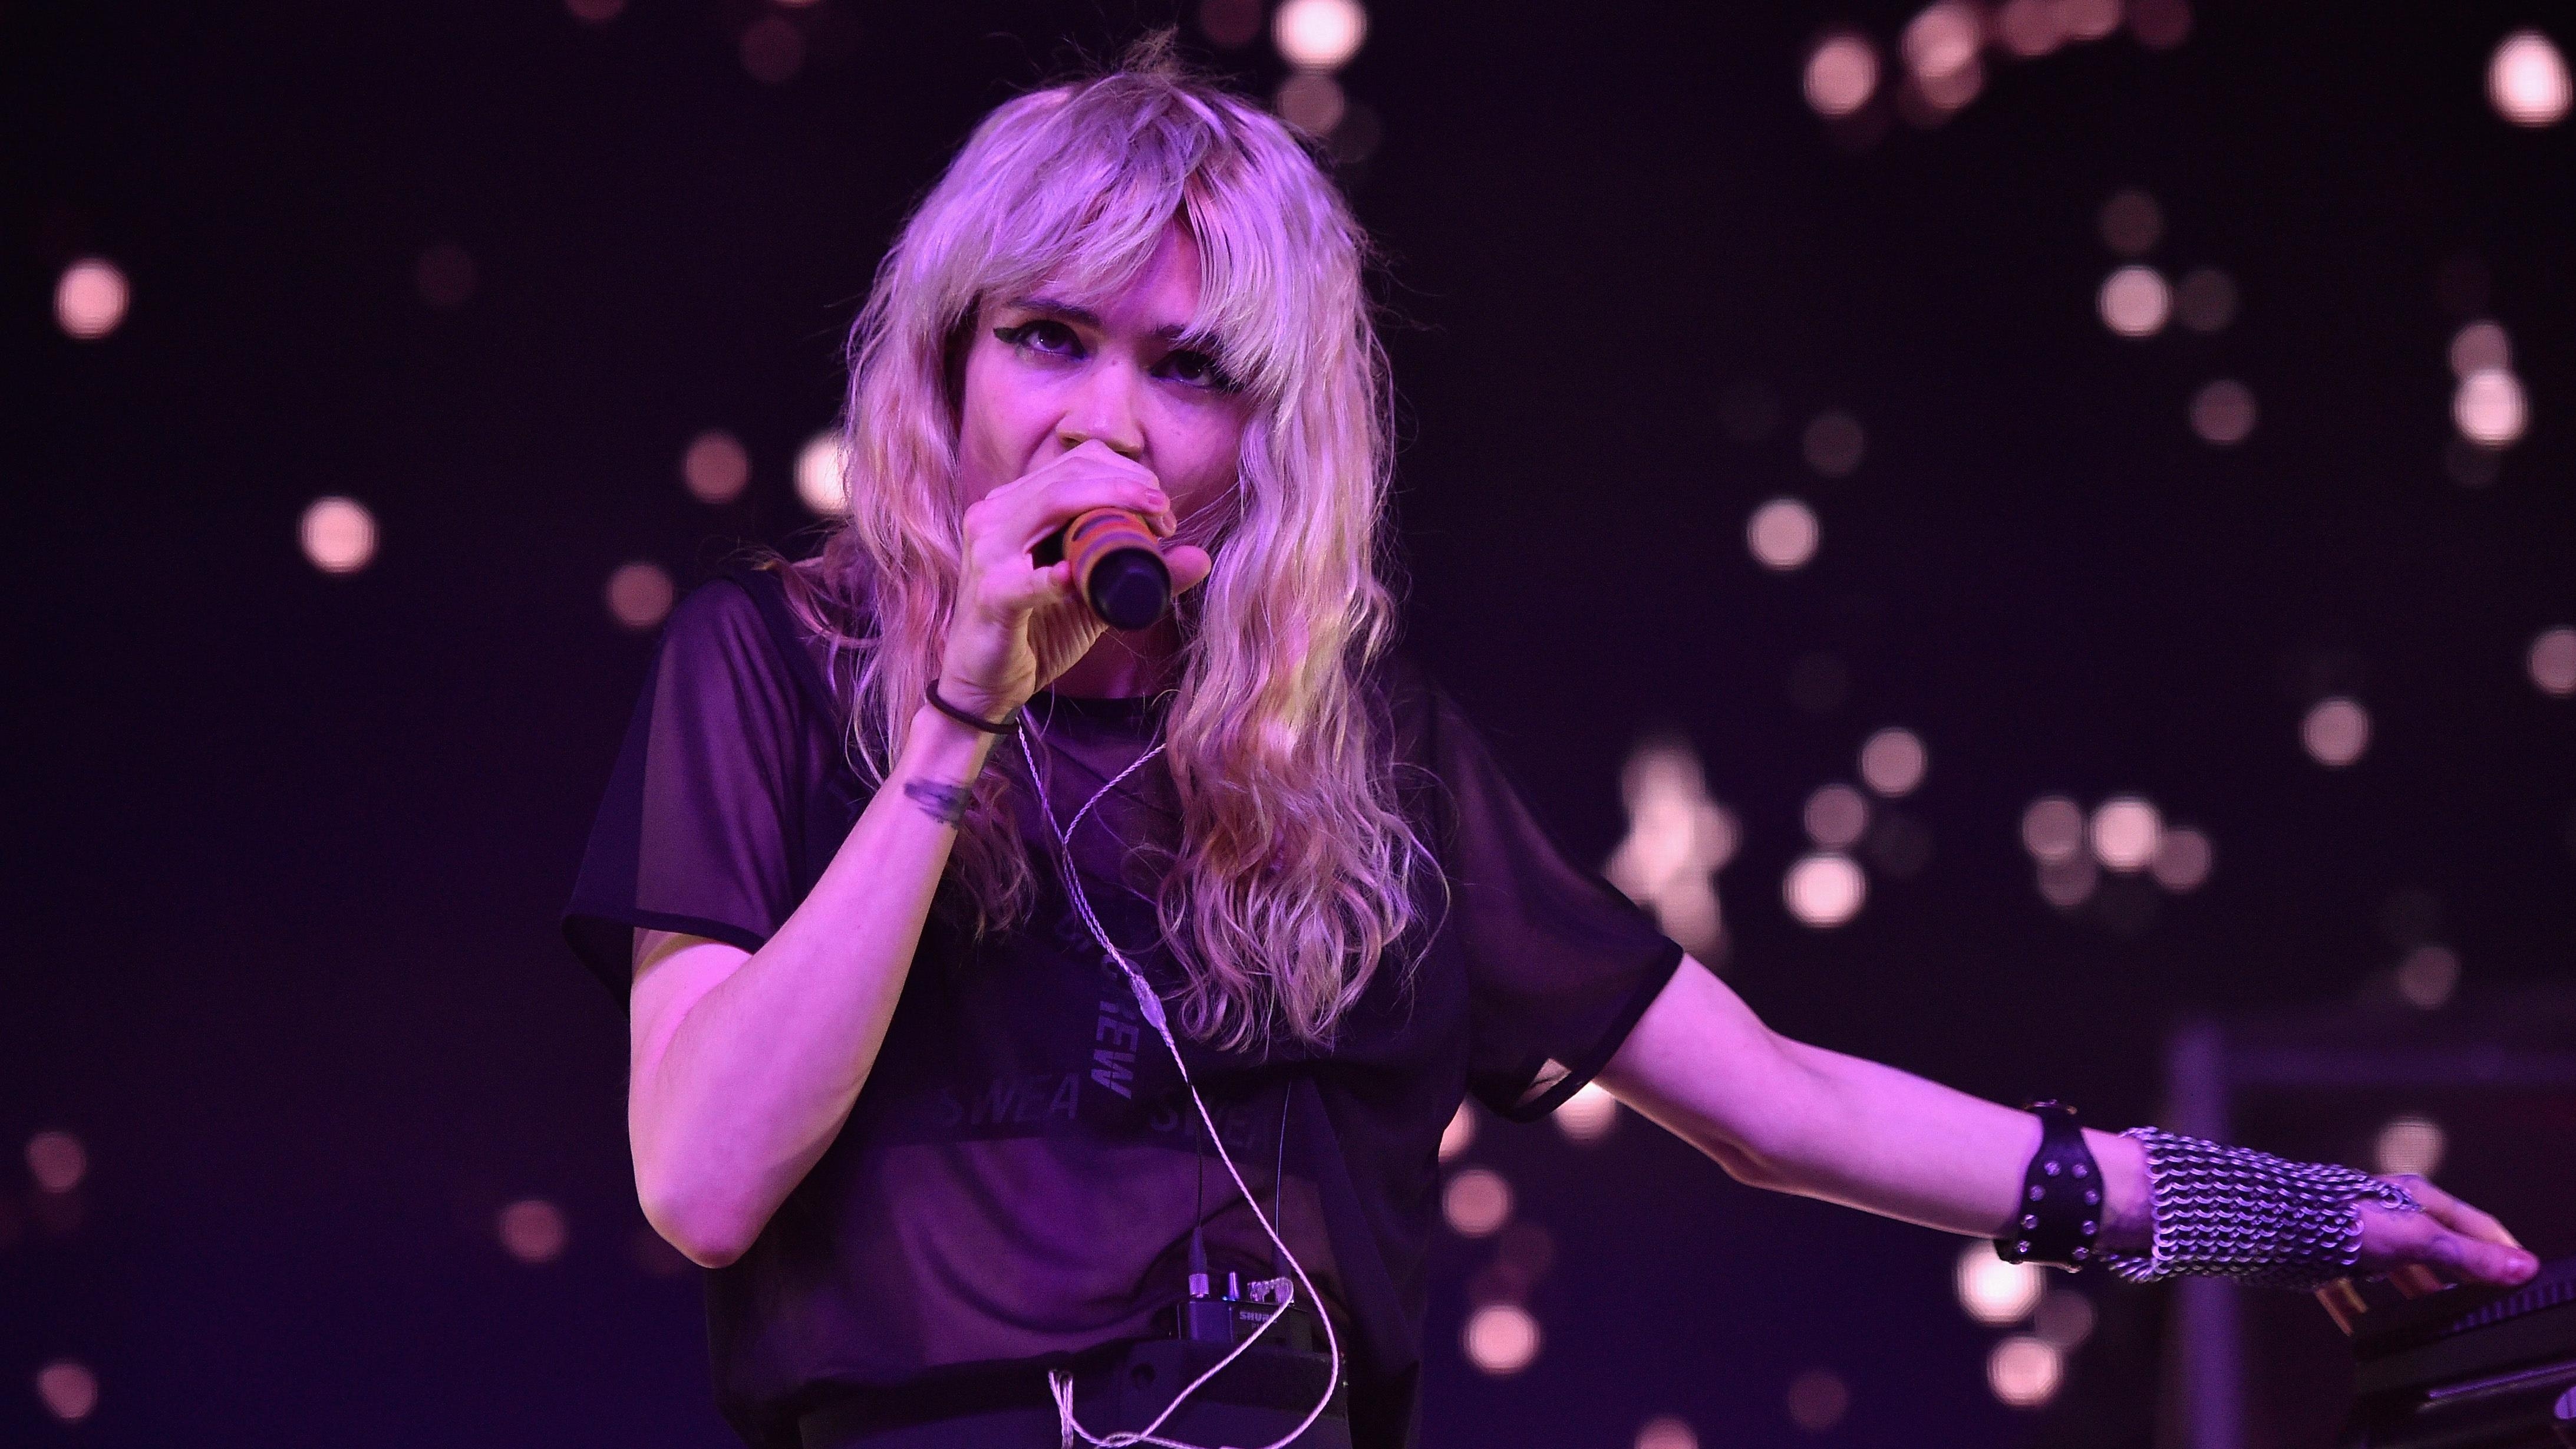 Grimes reveals she doesn't know what communism actually is in AI-praising TikTok